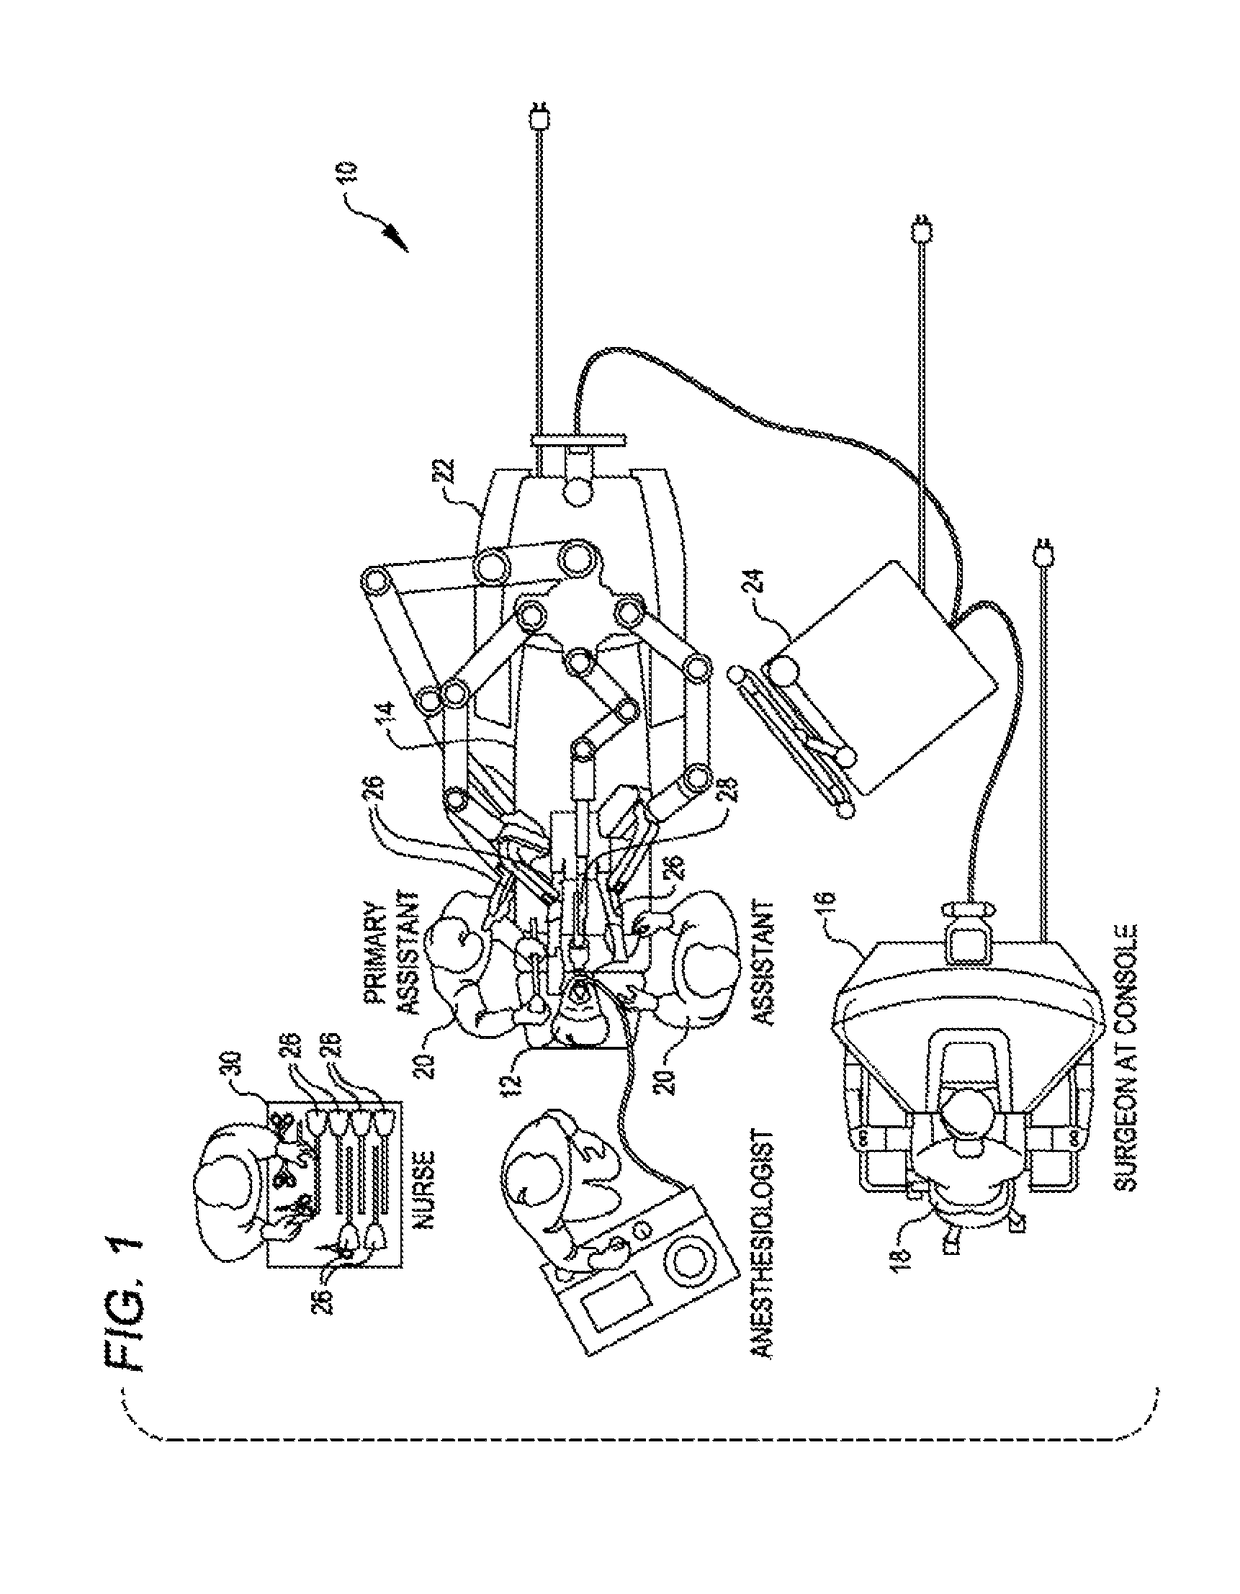 Control input accuracy for teleoperated surgical instrument